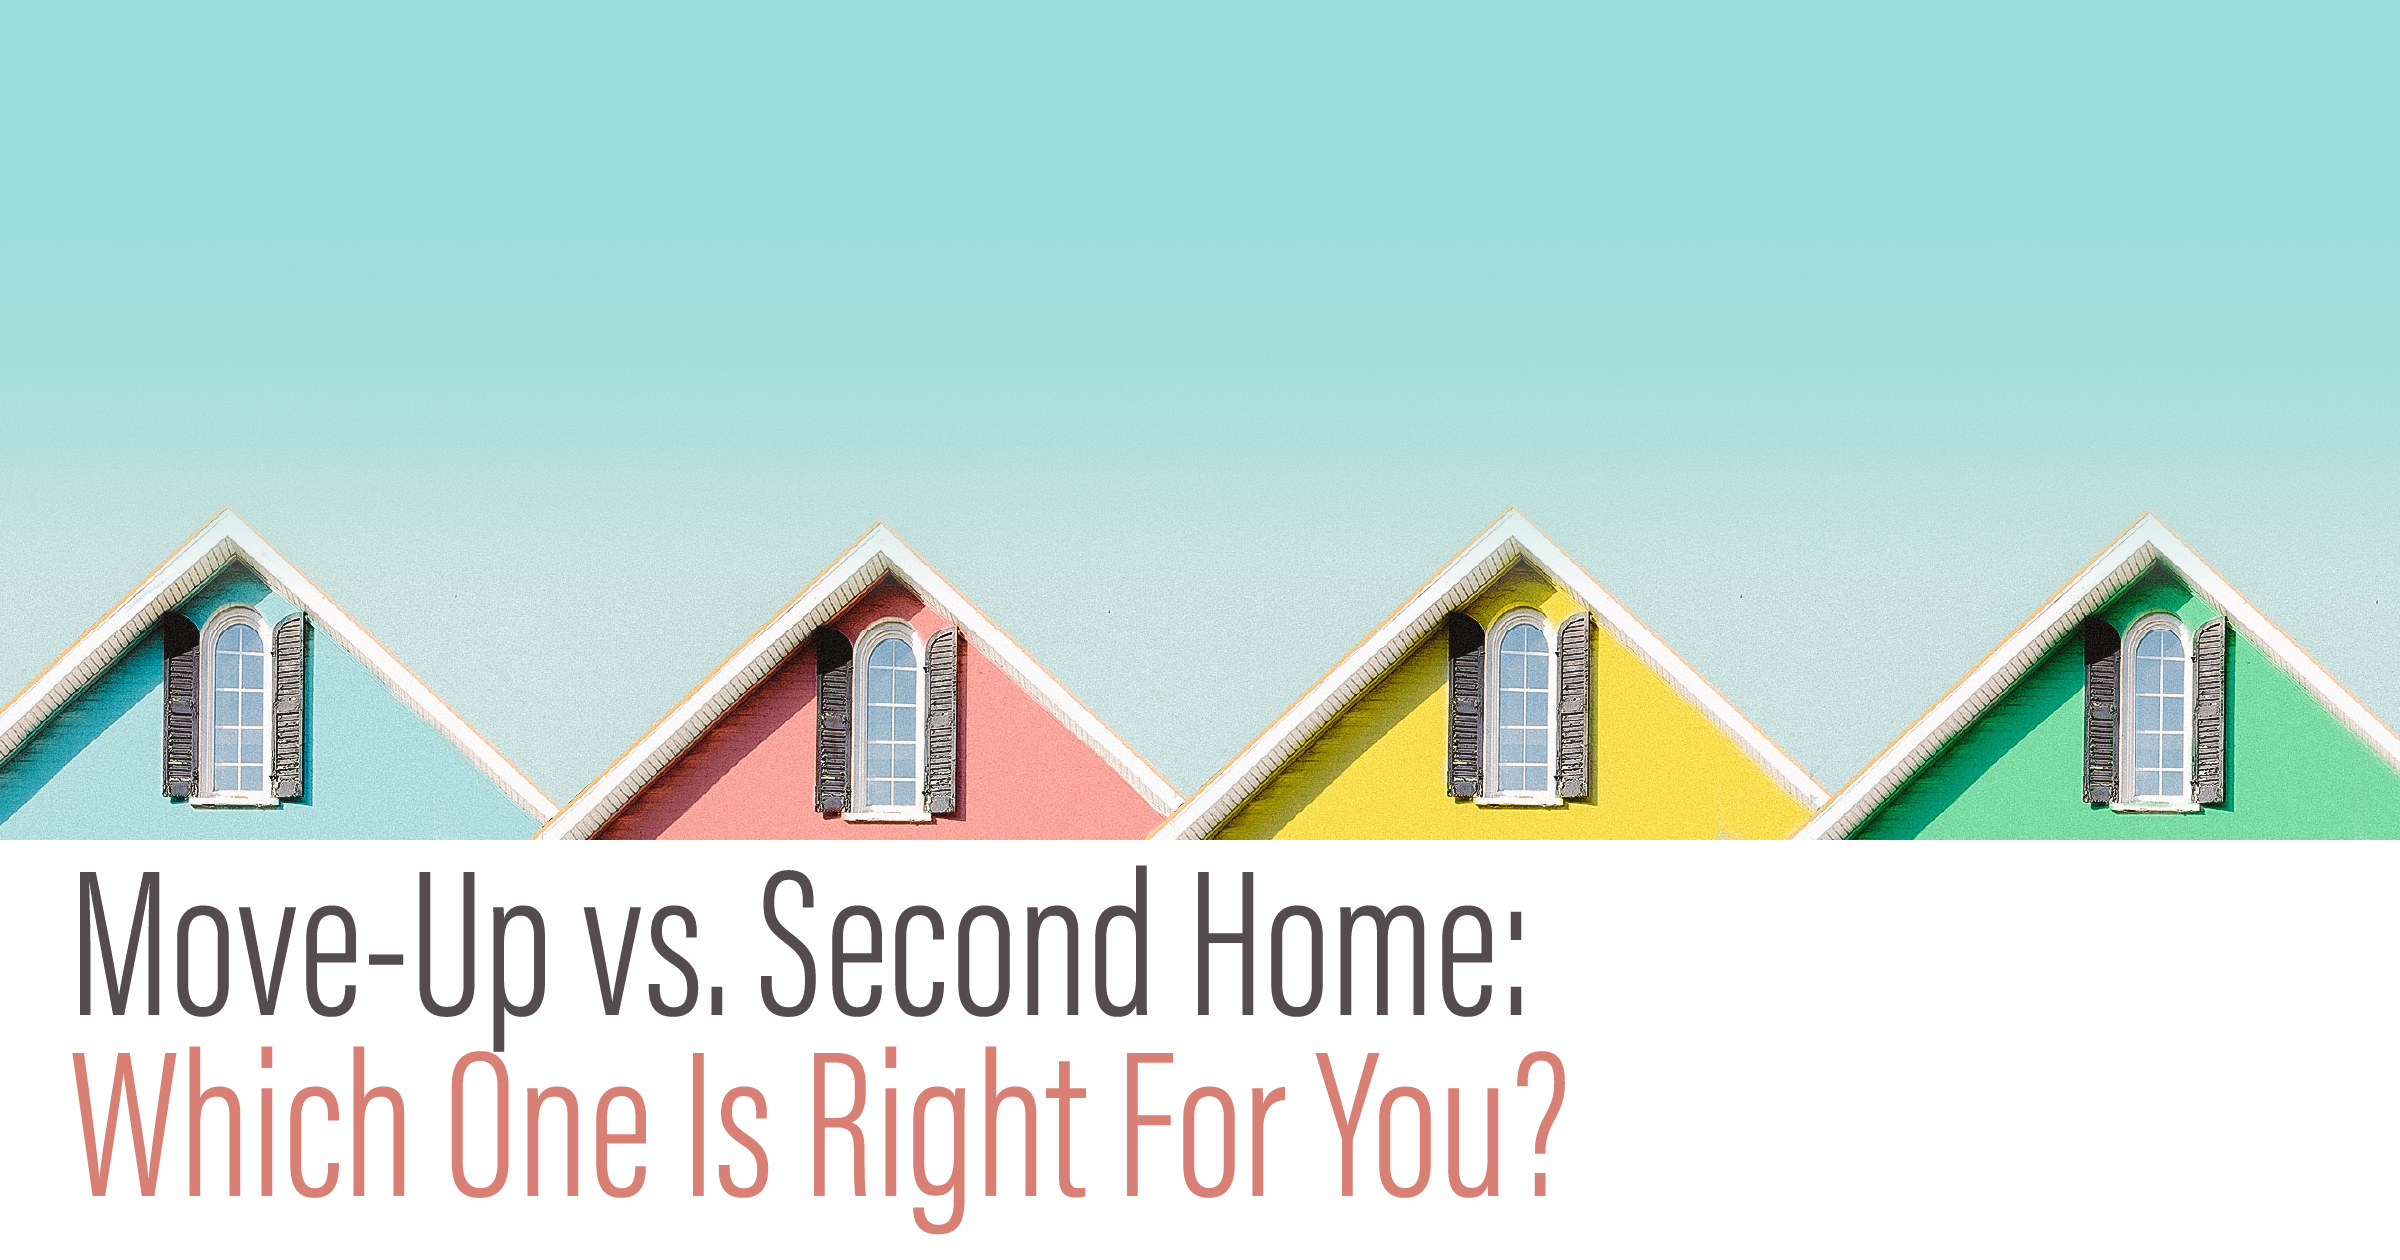 Move-up vs Second Home: Which One is Right For You?